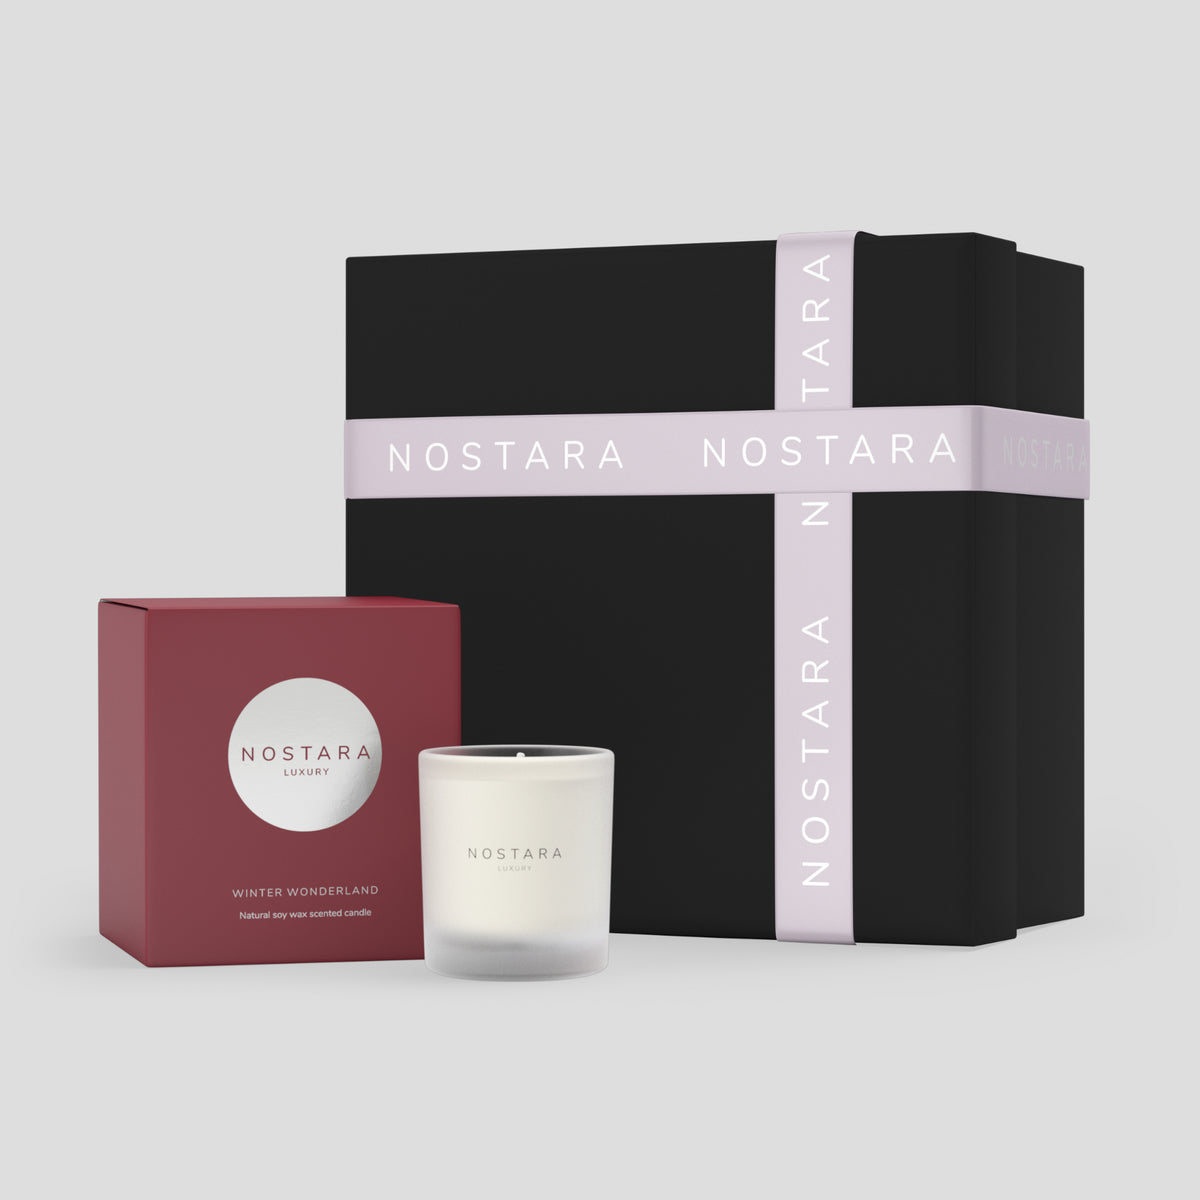 Nostara home fragrance candle gift set with travel candle